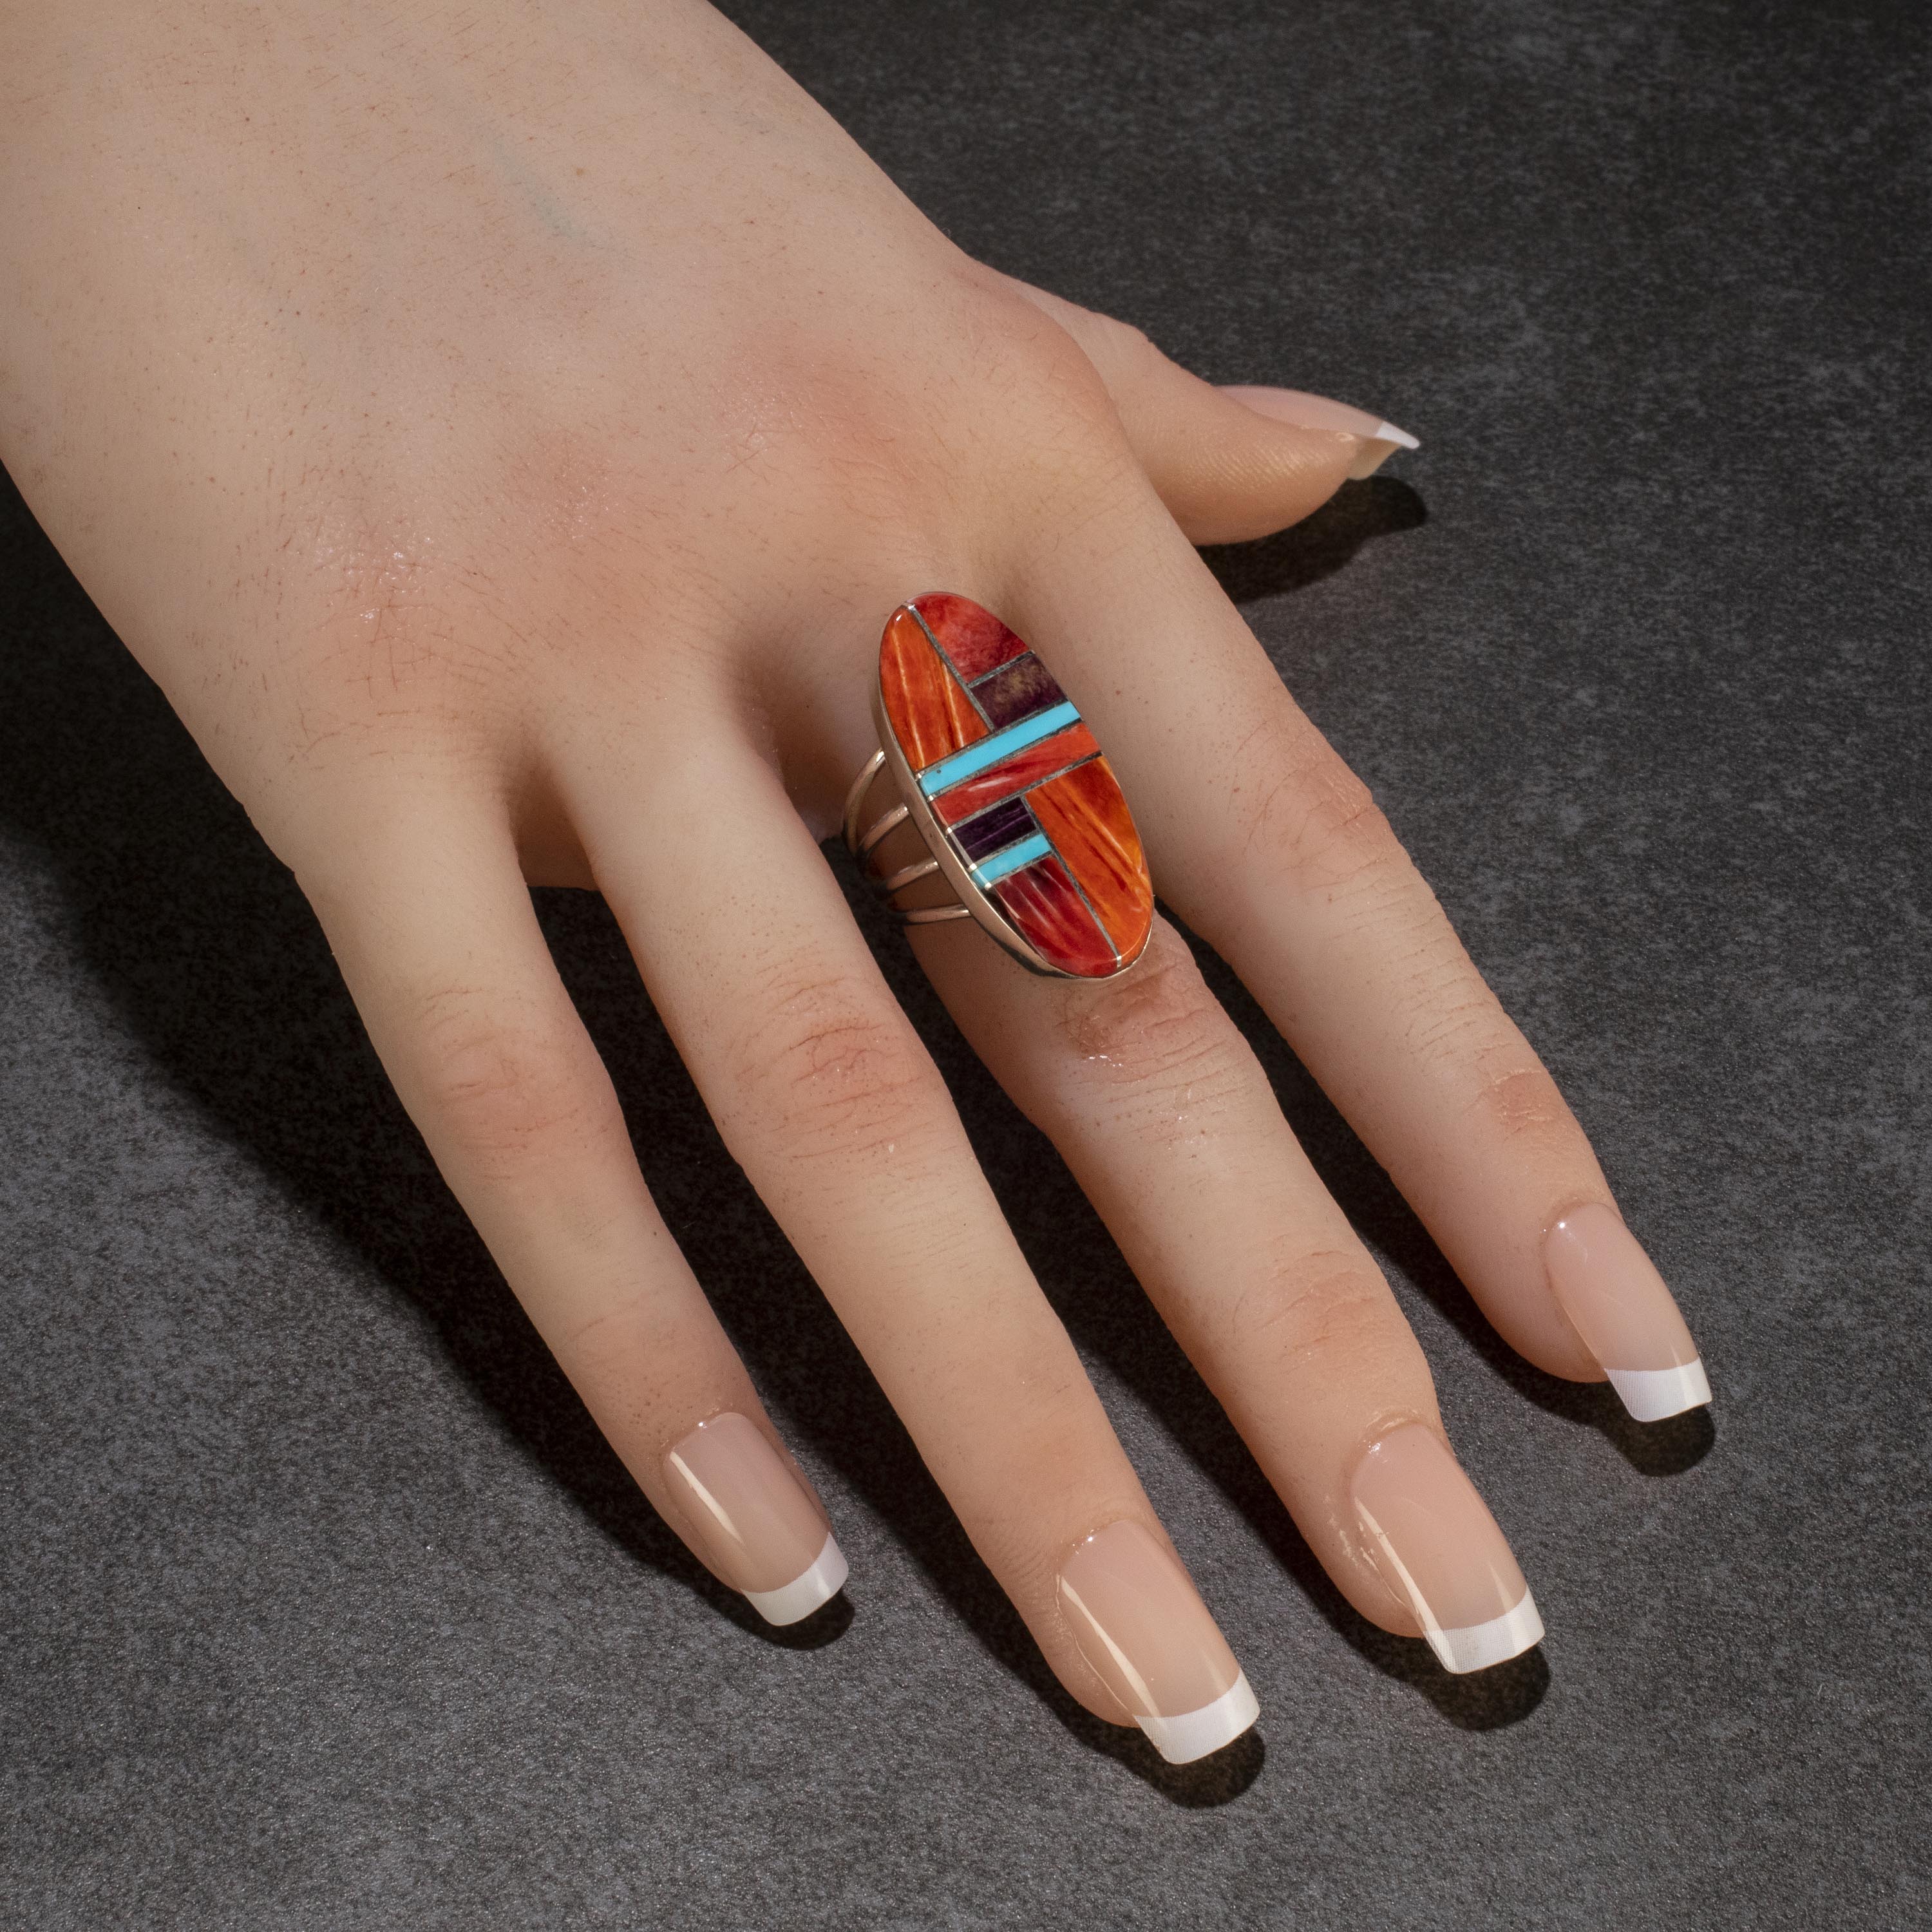 Kalifano Native American Jewelry 6 Red, Orange, and Purple Spiny Oyster Shell with Turquoise Inlay USA Native American Made 925 Sterling Silver Ring NAR800.040.6